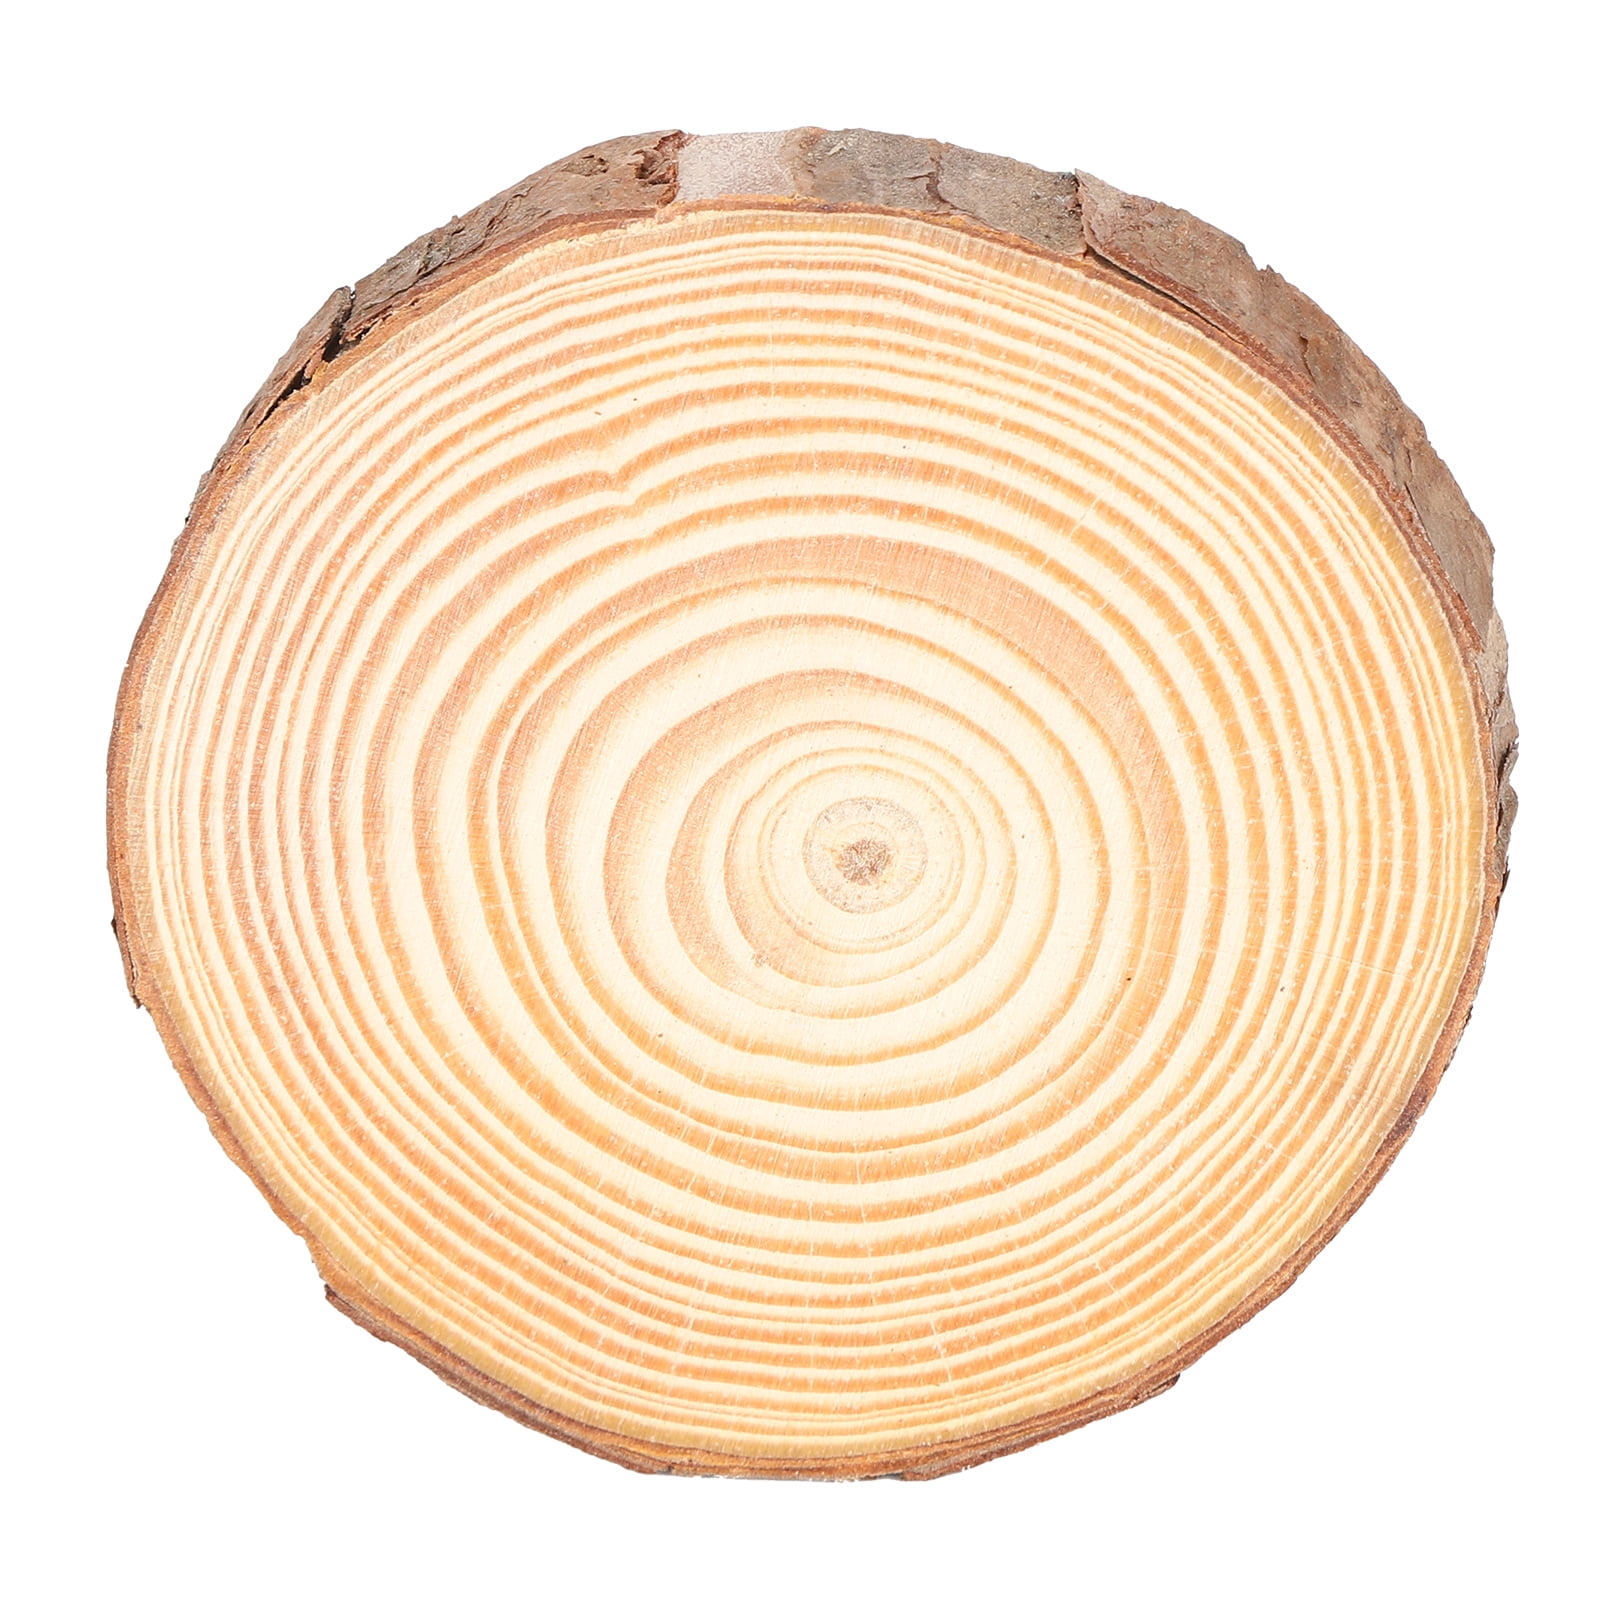 Wood Slices For DIY Crafts Log Discs Round Centerpiece Dried Natural 50Pcs 2-4CM 